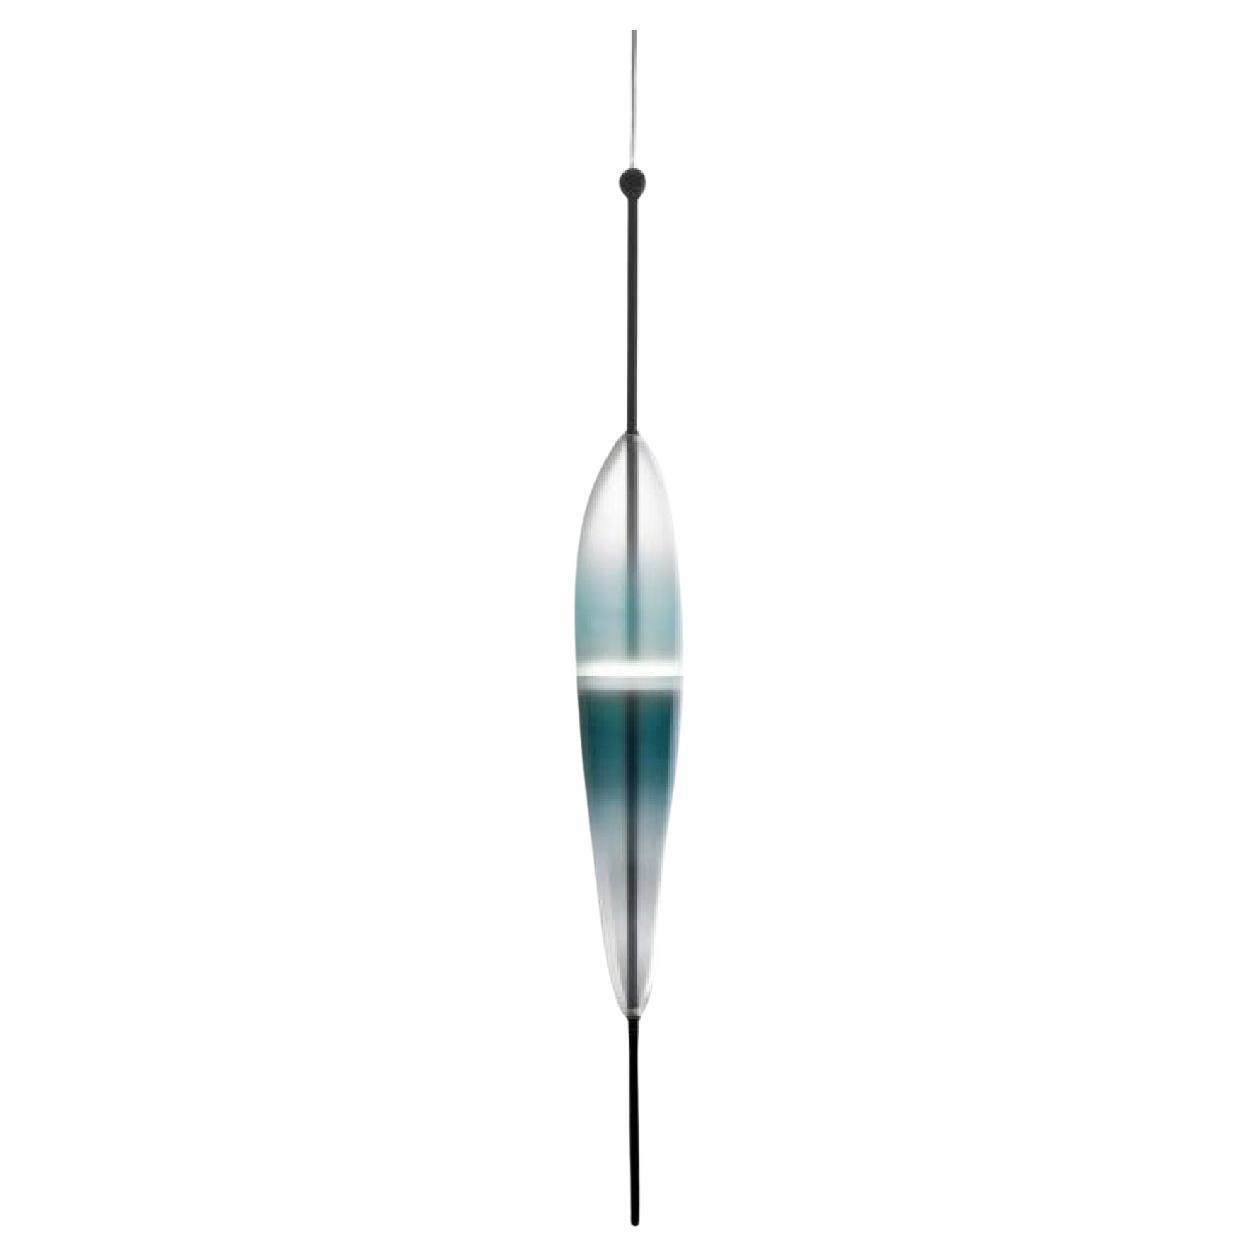 FLOW[T] S2 Pendant lamp in Turquoise by Nao Tamura for Wonderglass